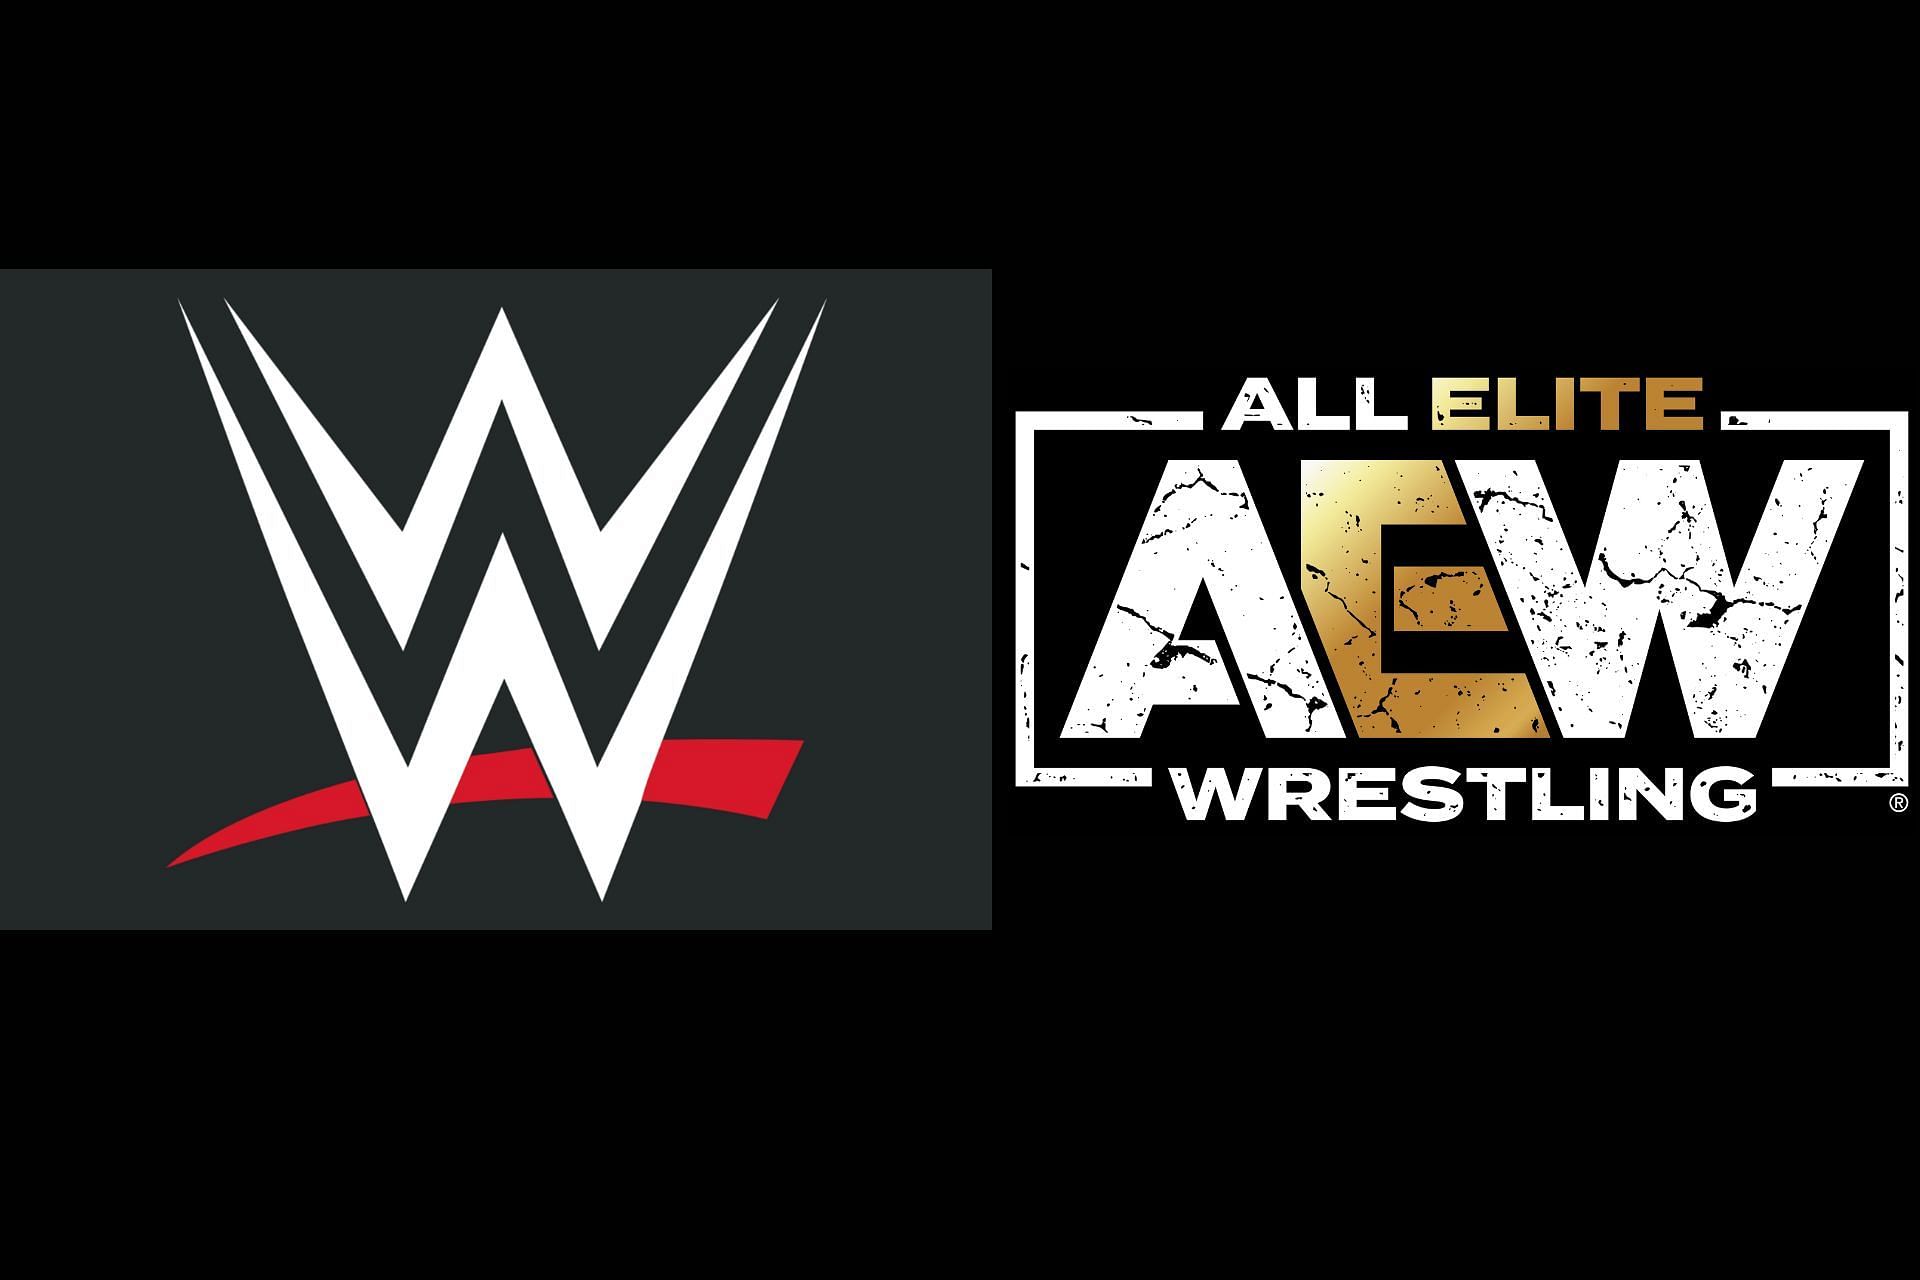 Current AEW wrestler not impressed with his WWE stint